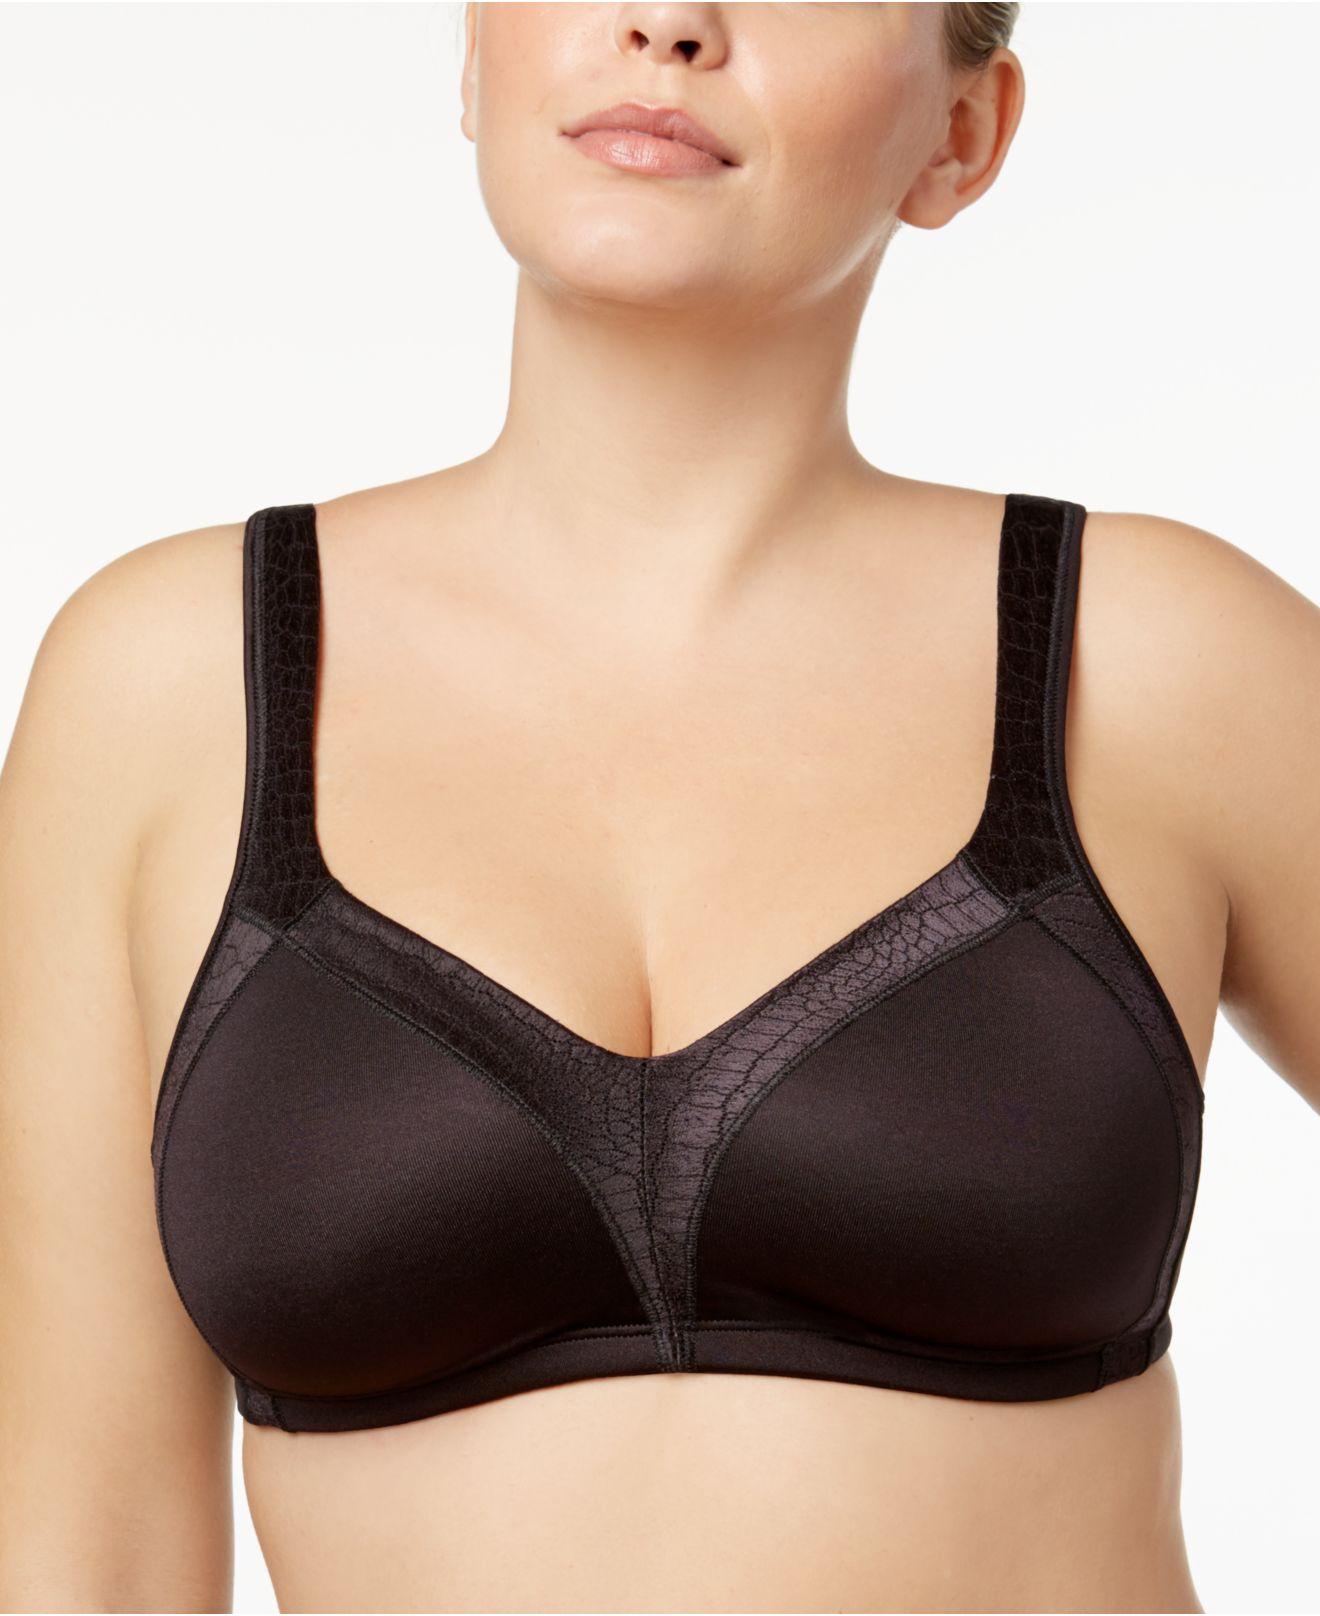 Playtex 18 Hour Back Smoother Bra 4e77, Online Only in Black